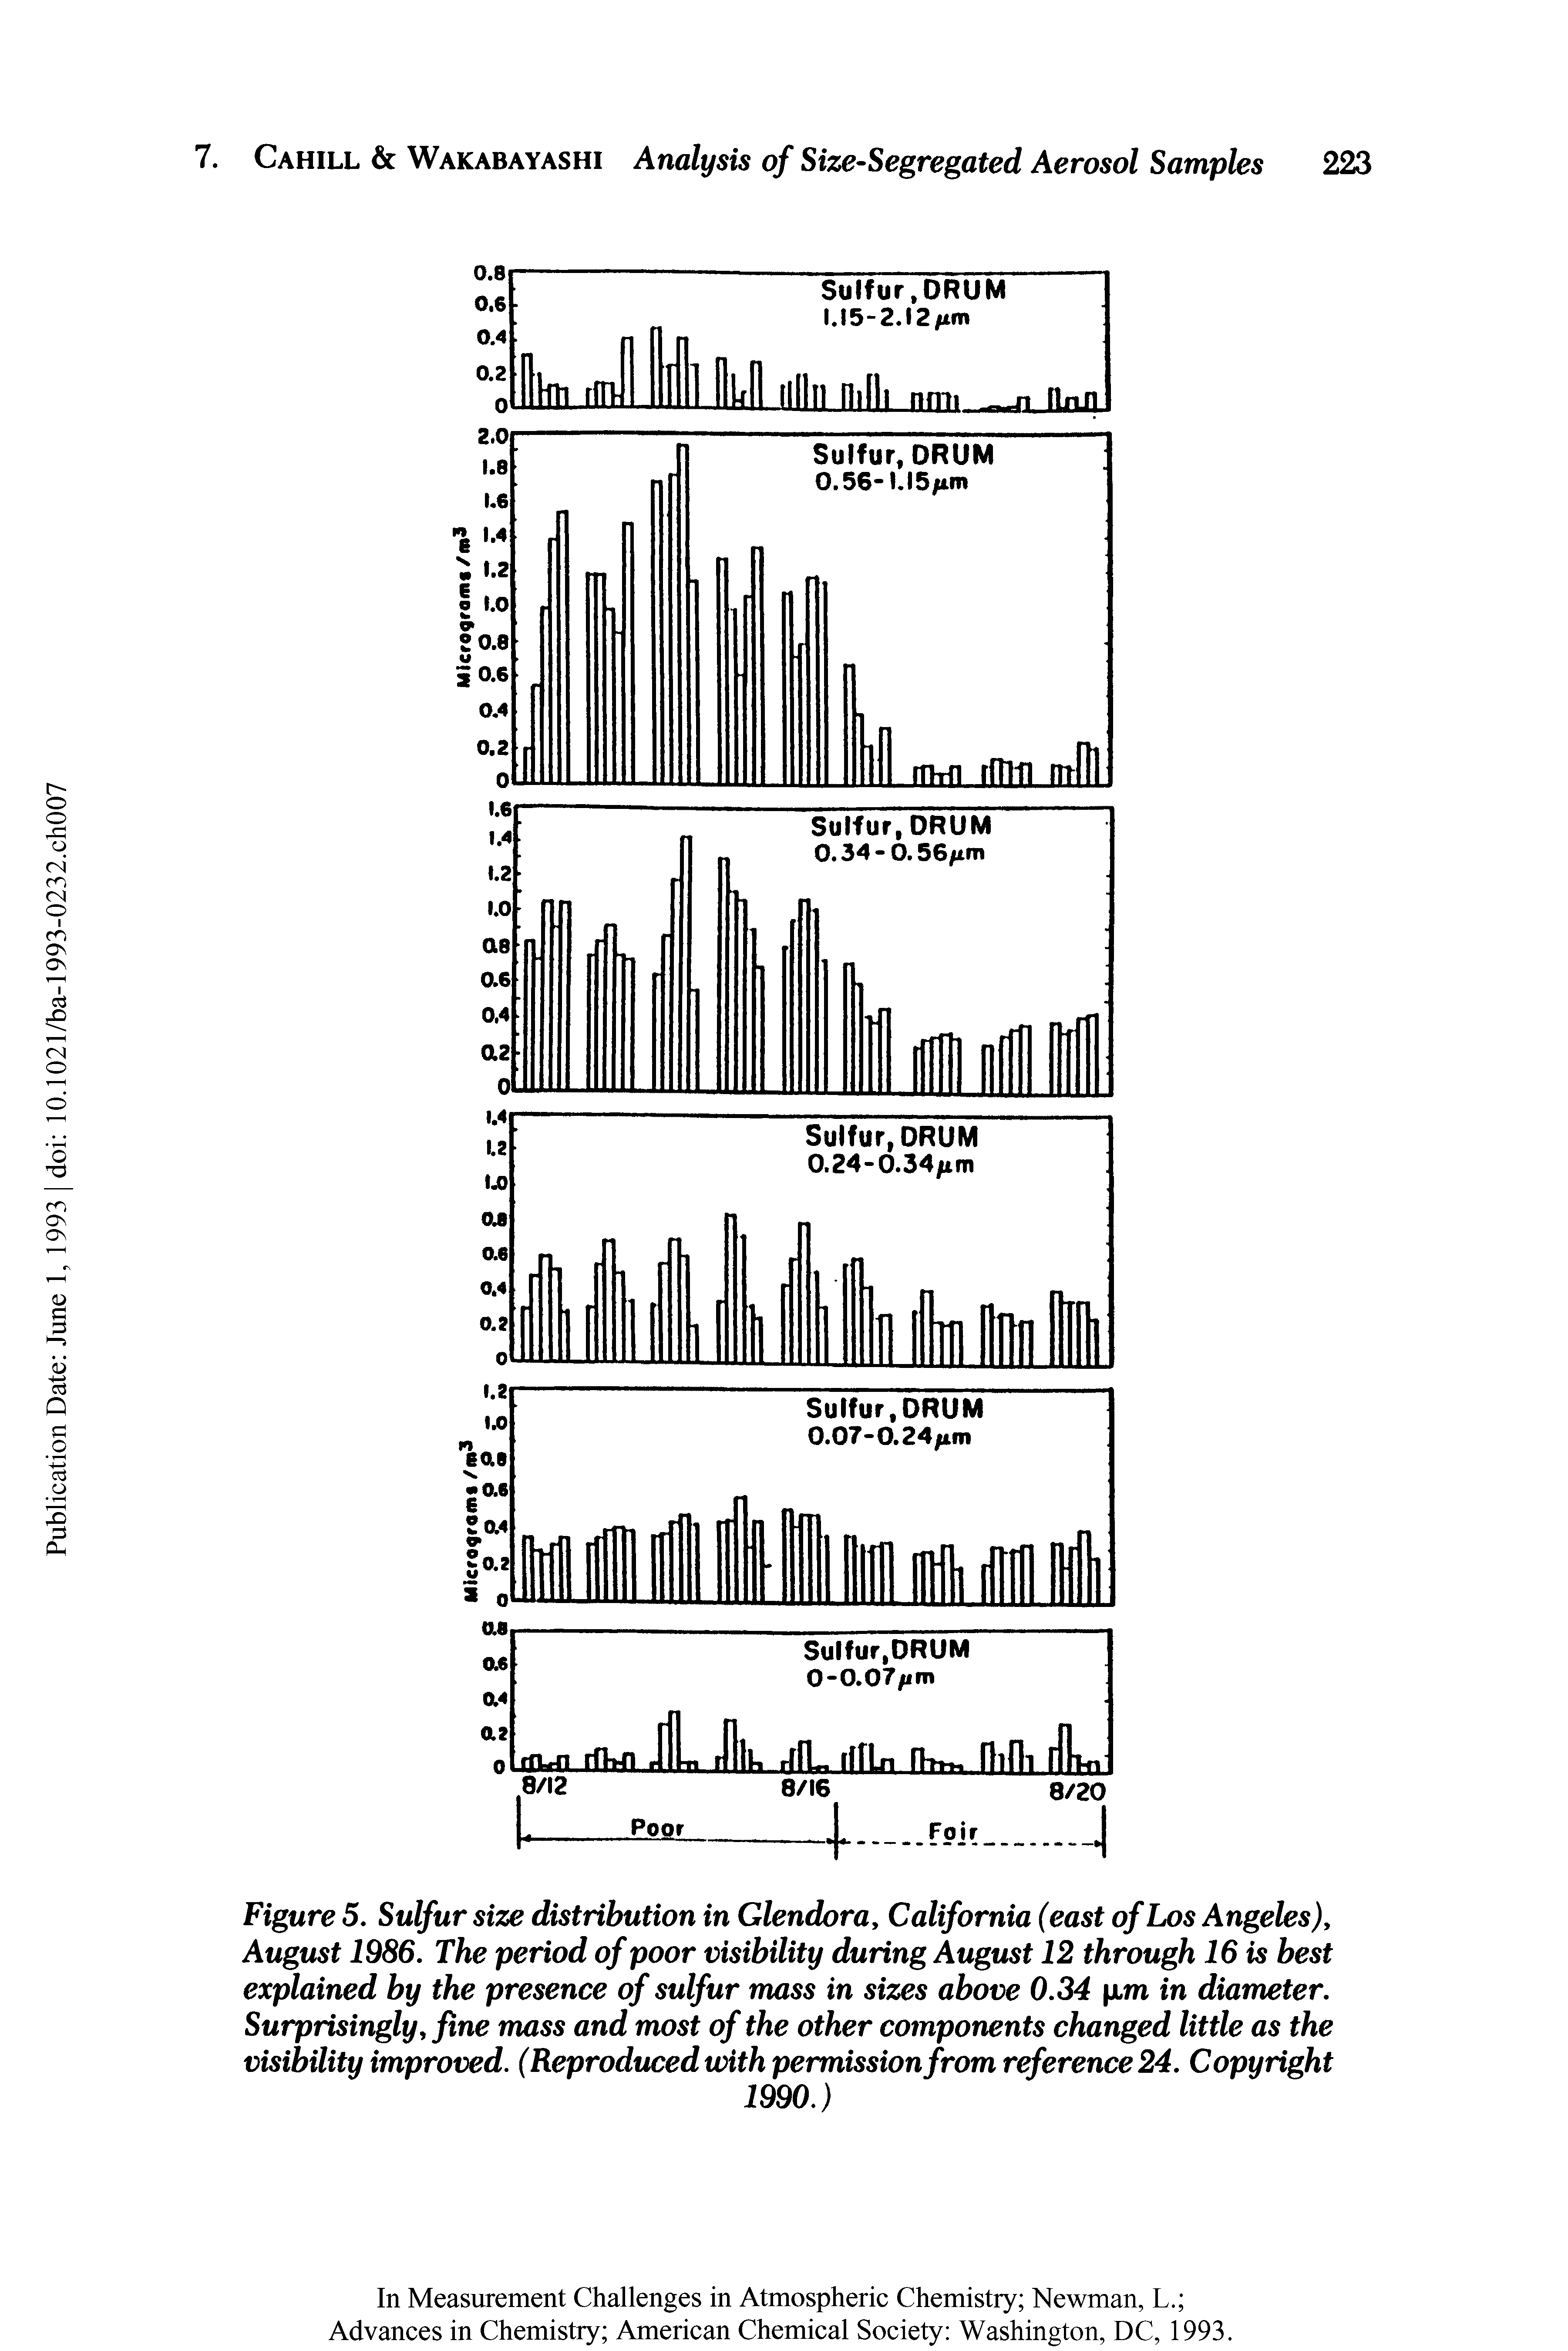 Figure 5. Sulfur size distribution in Glendora, California (east of Los Angeles), August 1986. The period of poor visibility during August 12 through 16 is best explained by the presence of sulfur mass in sizes above 0.34 xm in diameter. Surprisingly, fine mass and most of the other components changed little as the visibility improved. (Reproduced with permission from reference 24. Copyright...